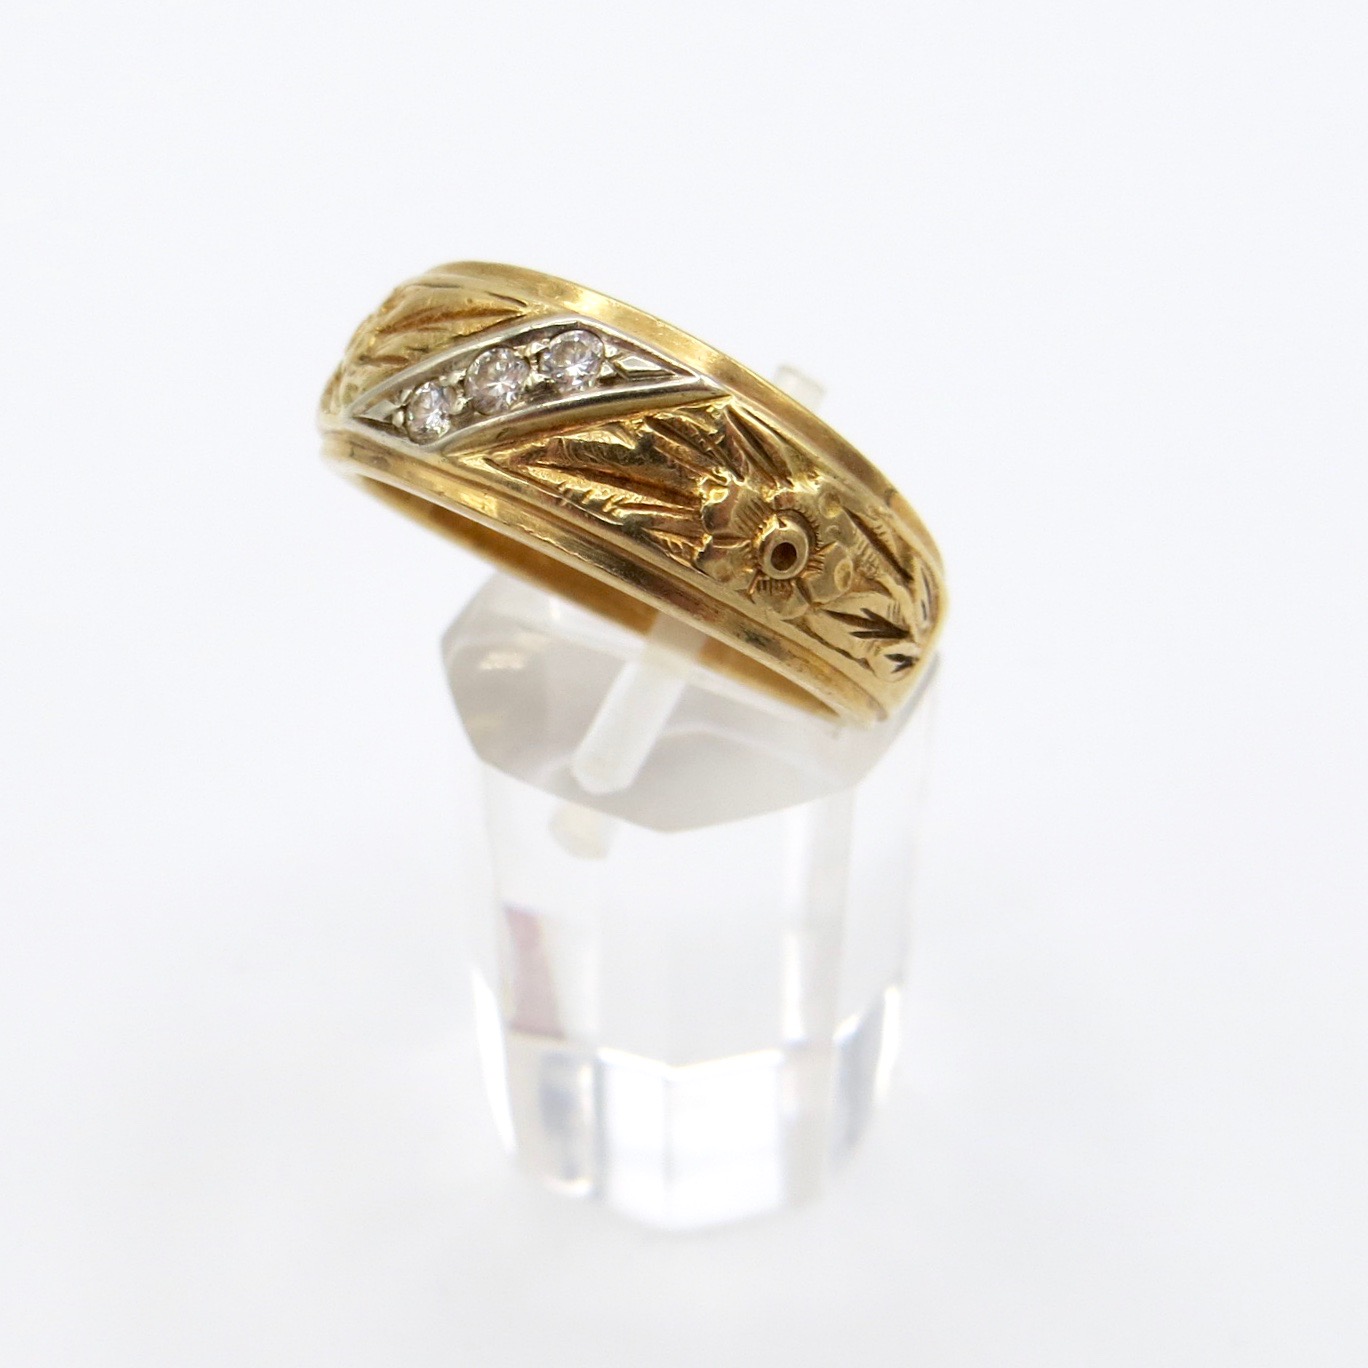 14kt Gold & Diamond Band with Floral Decoration